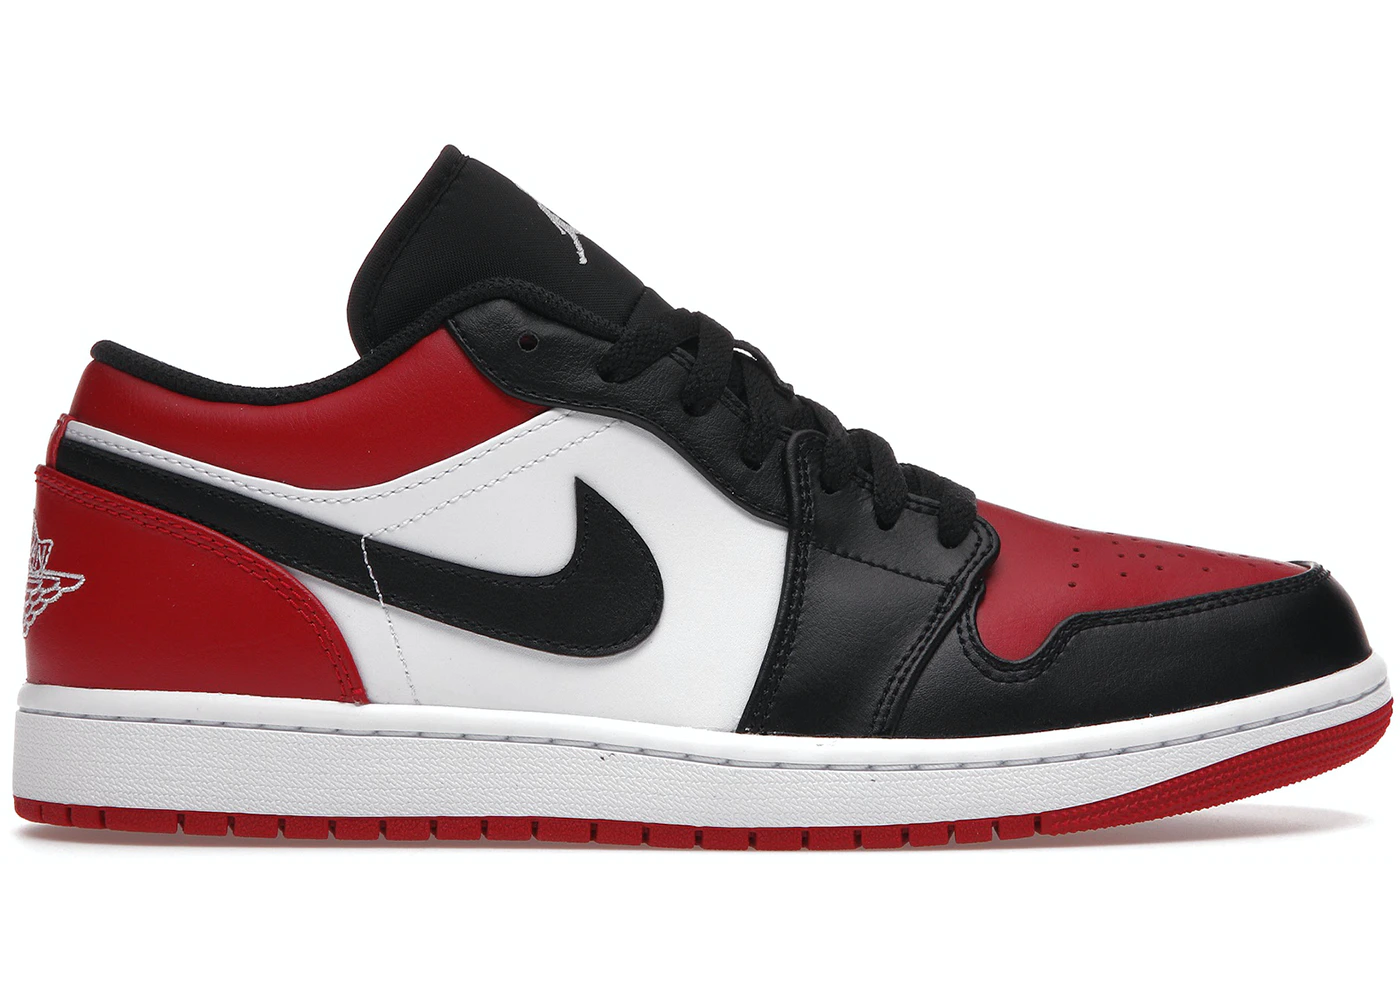 Now Available Air Jordan 1 Low "Bred Toe" — Sneaker Shouts